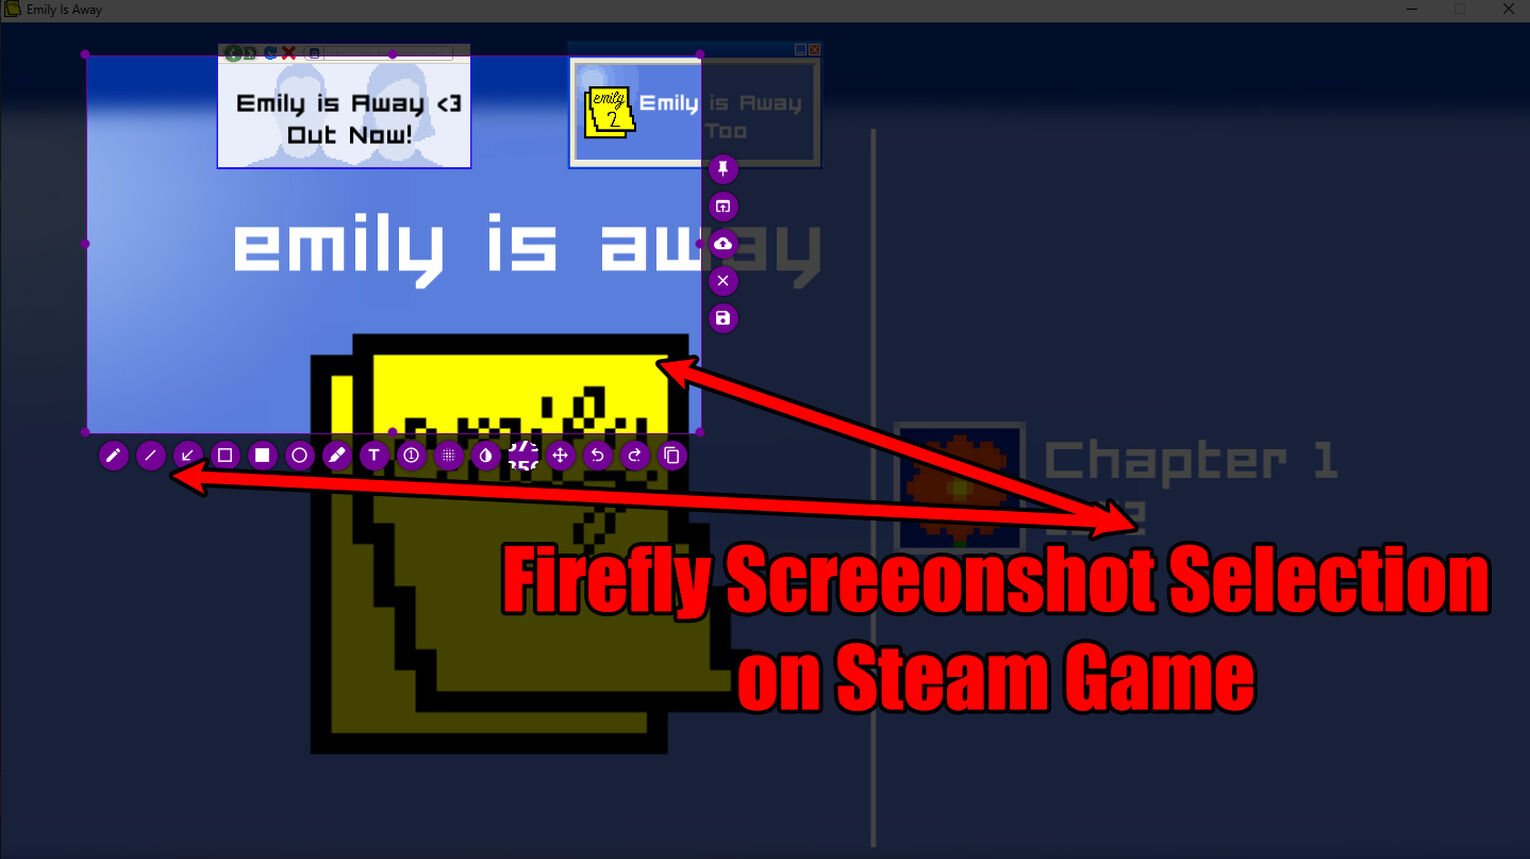 Steam Firefly In-Game Screenshot Selection